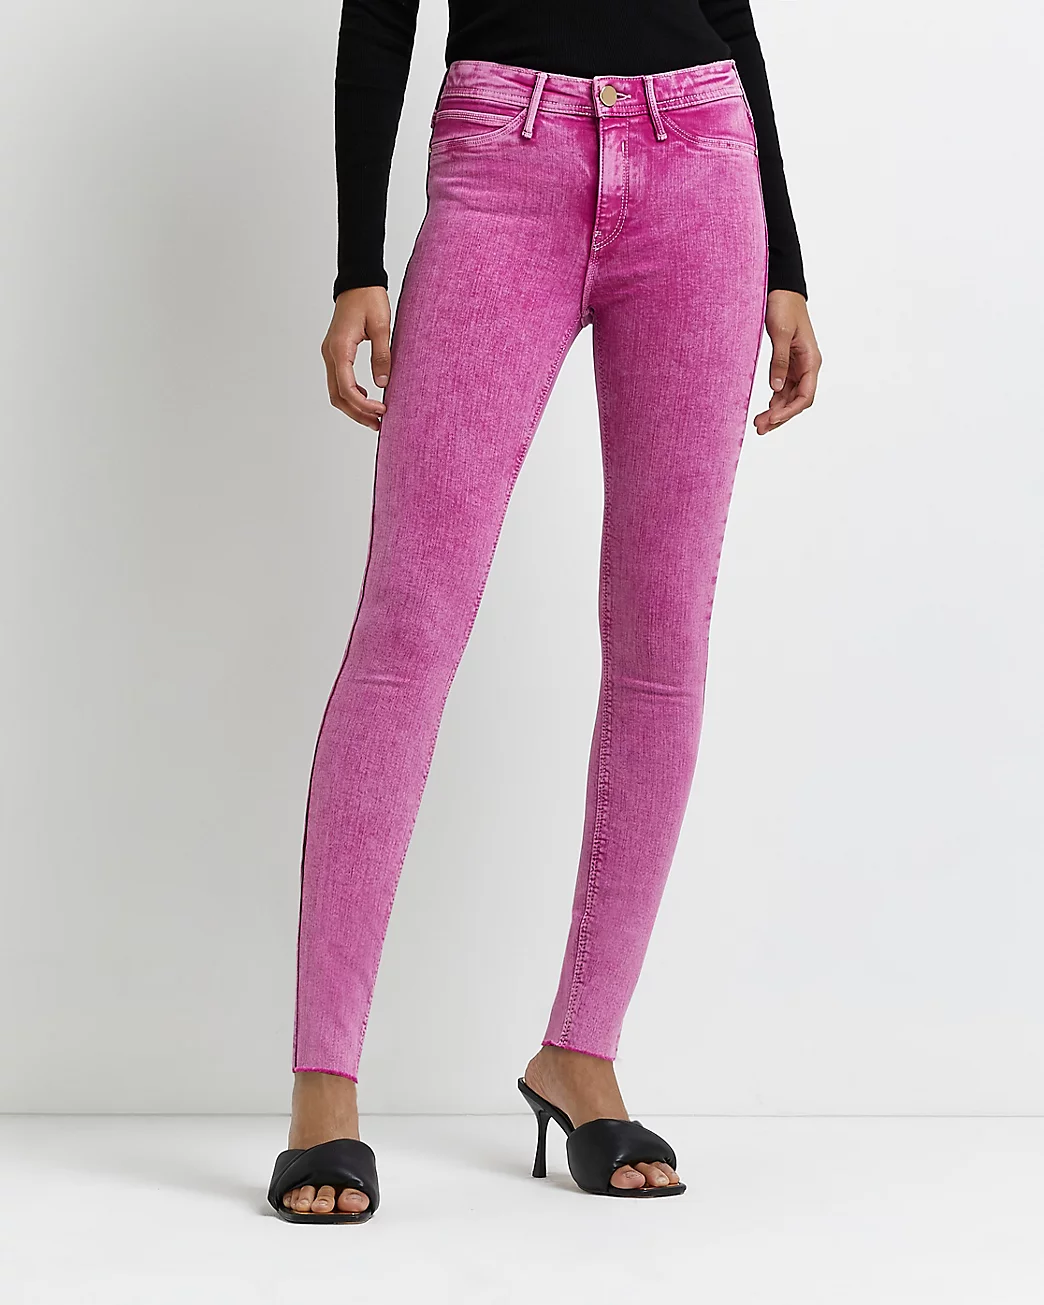 PINK MOLLY MID RISE SKINNY JEANS